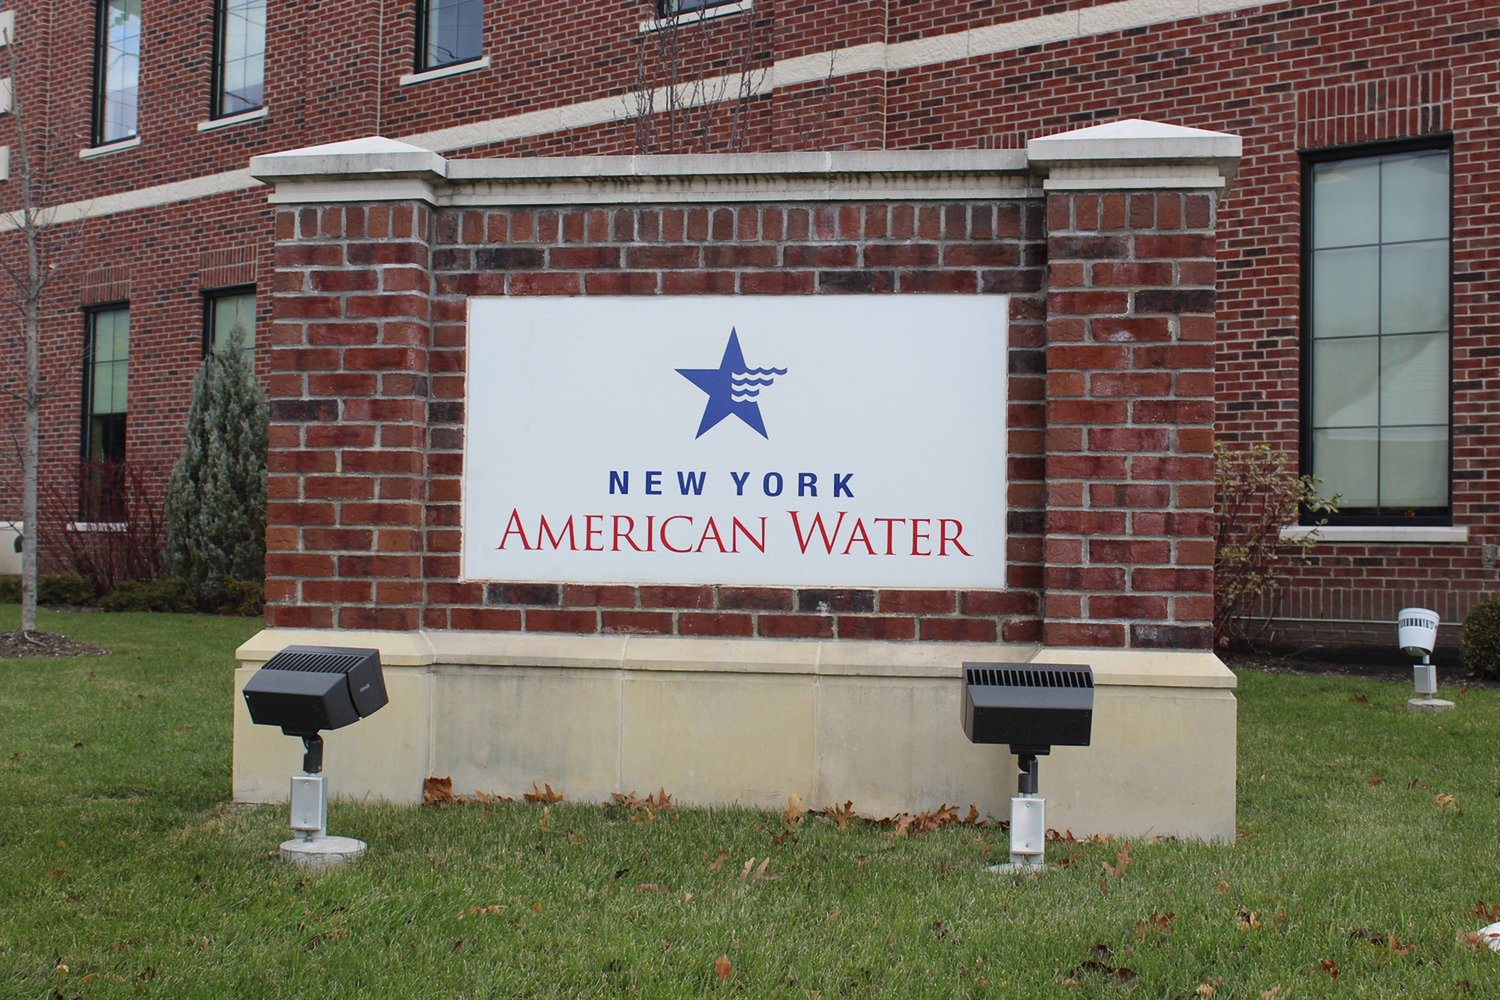 New York American Water’s corporate offices in Merrick.